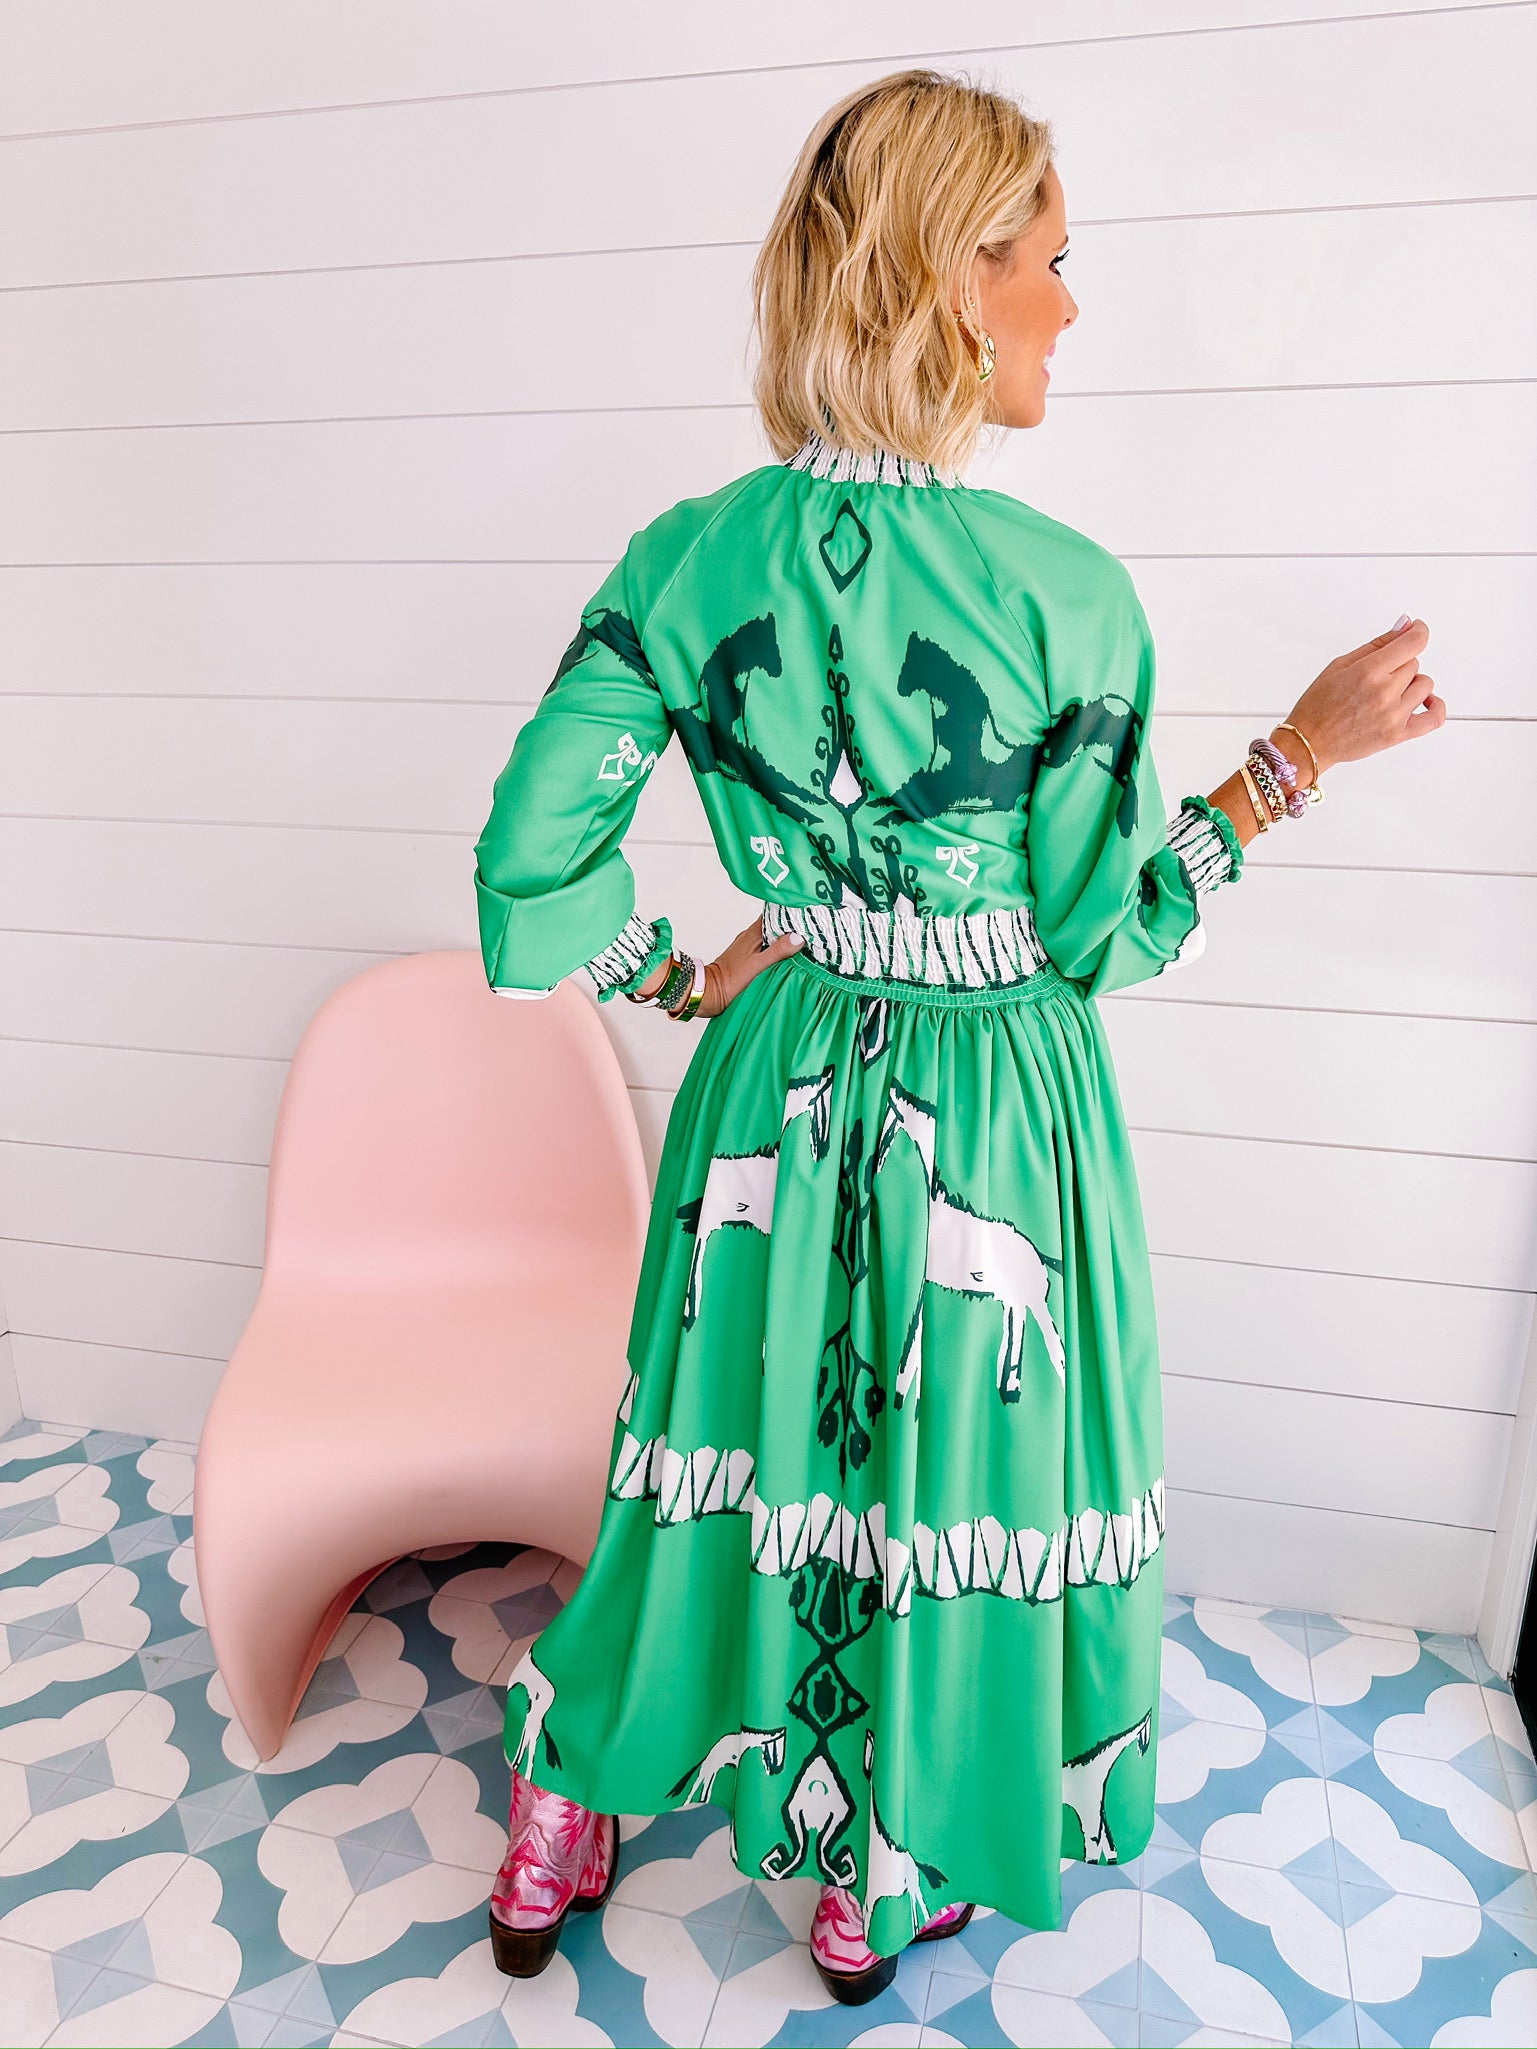 TO THE HORSE RACES DRESS - GREEN